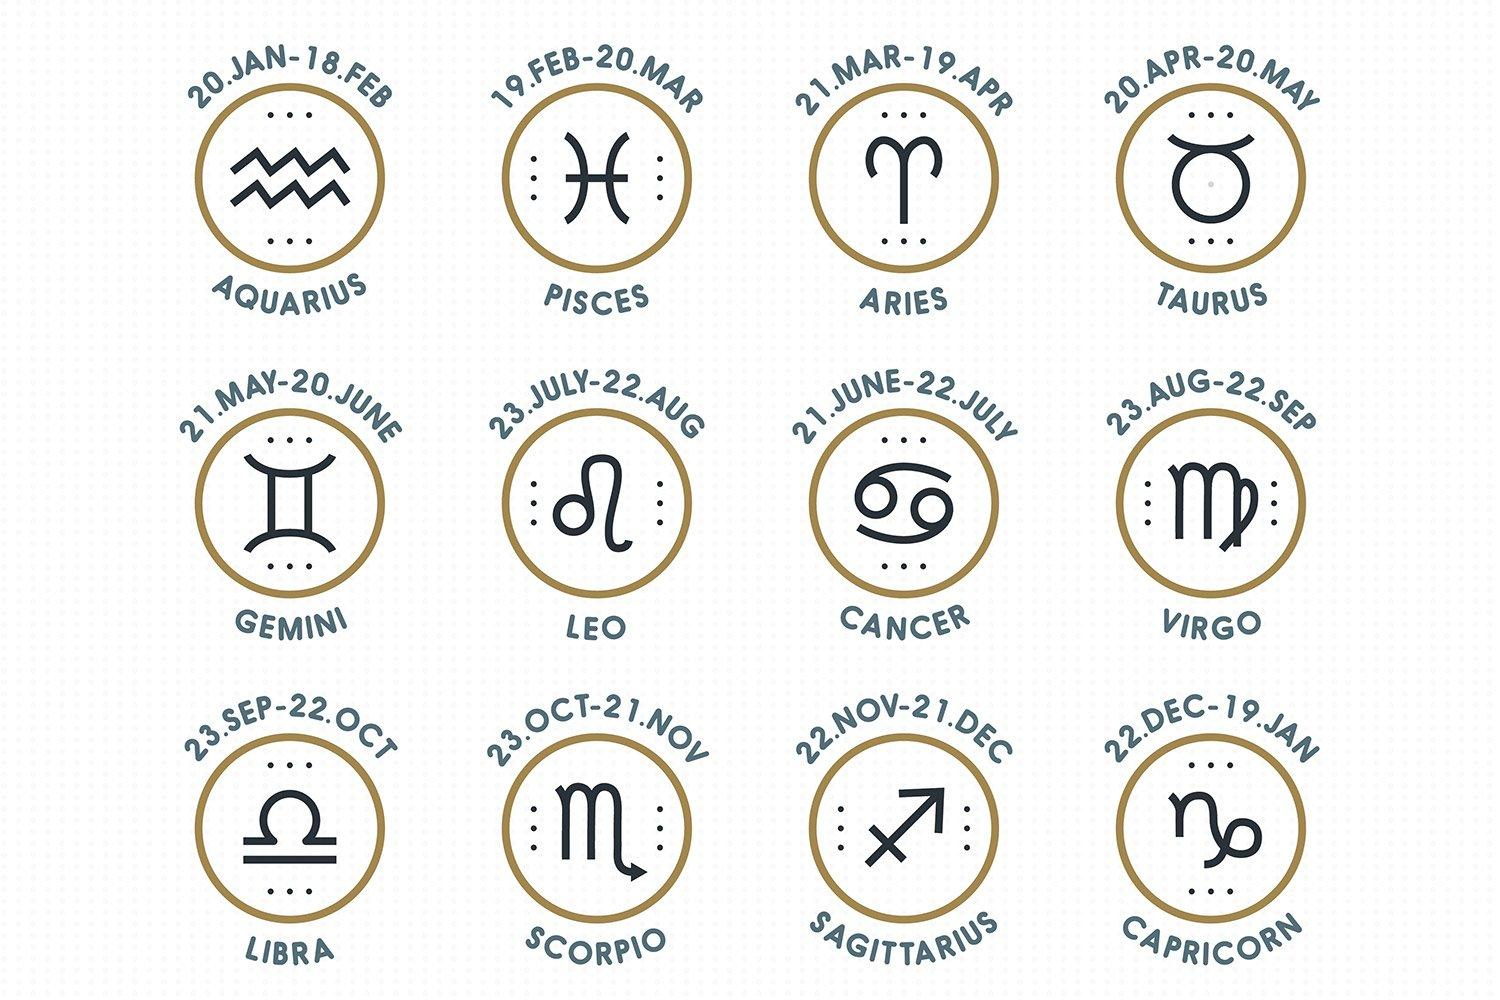 Daily Horoscope for September 29: Astrological Prediction for Zodiac Signs